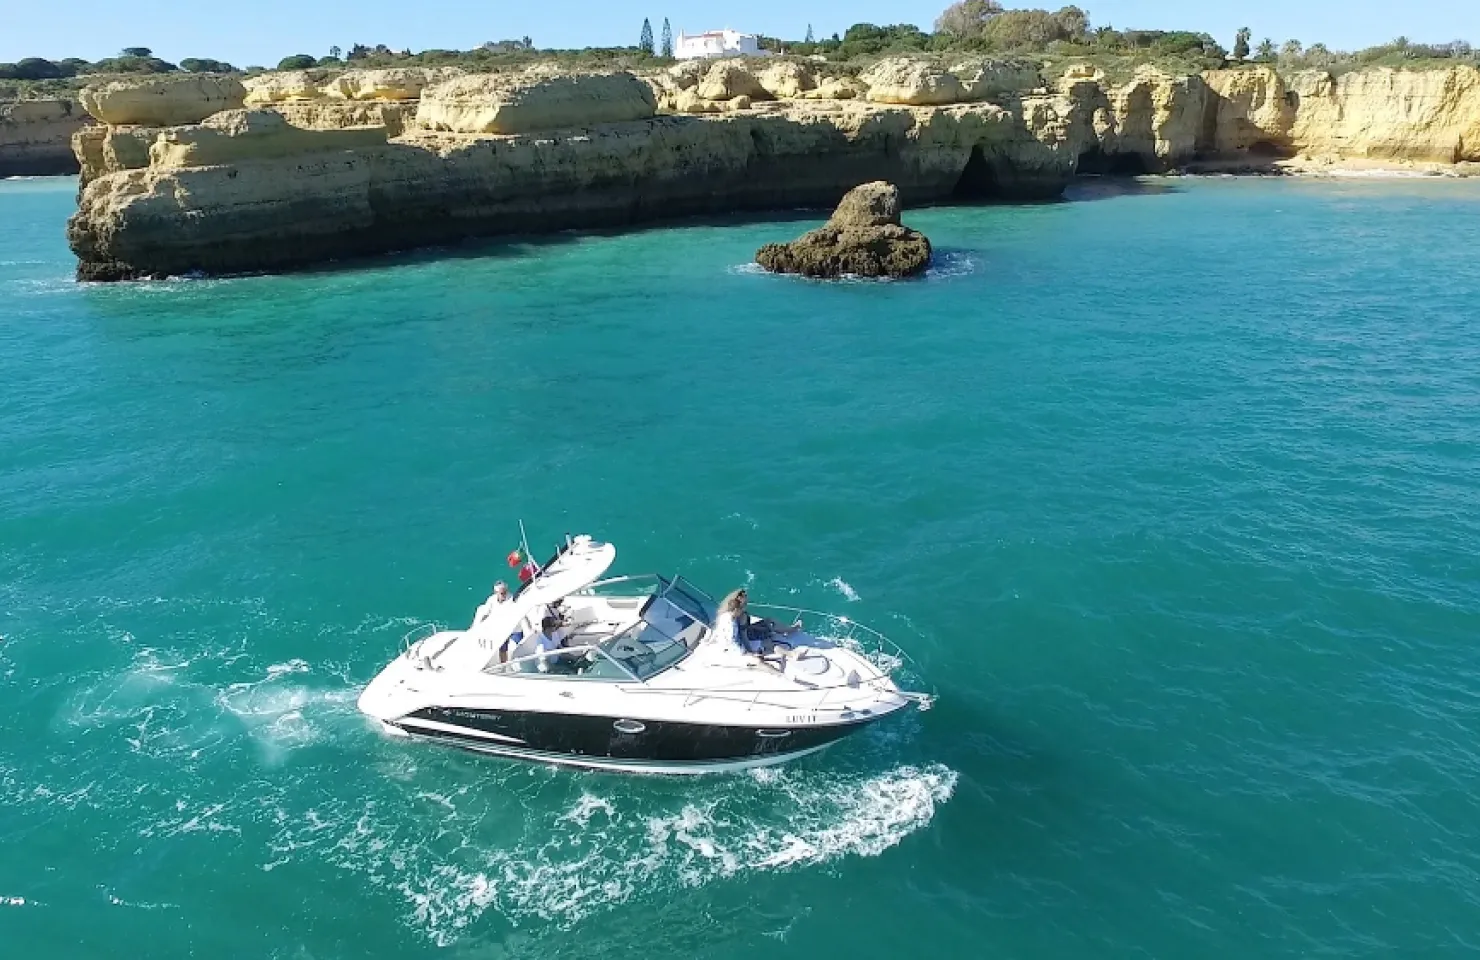 Luvit Yacht Charters - Algarve Boat Trips and Tours - 